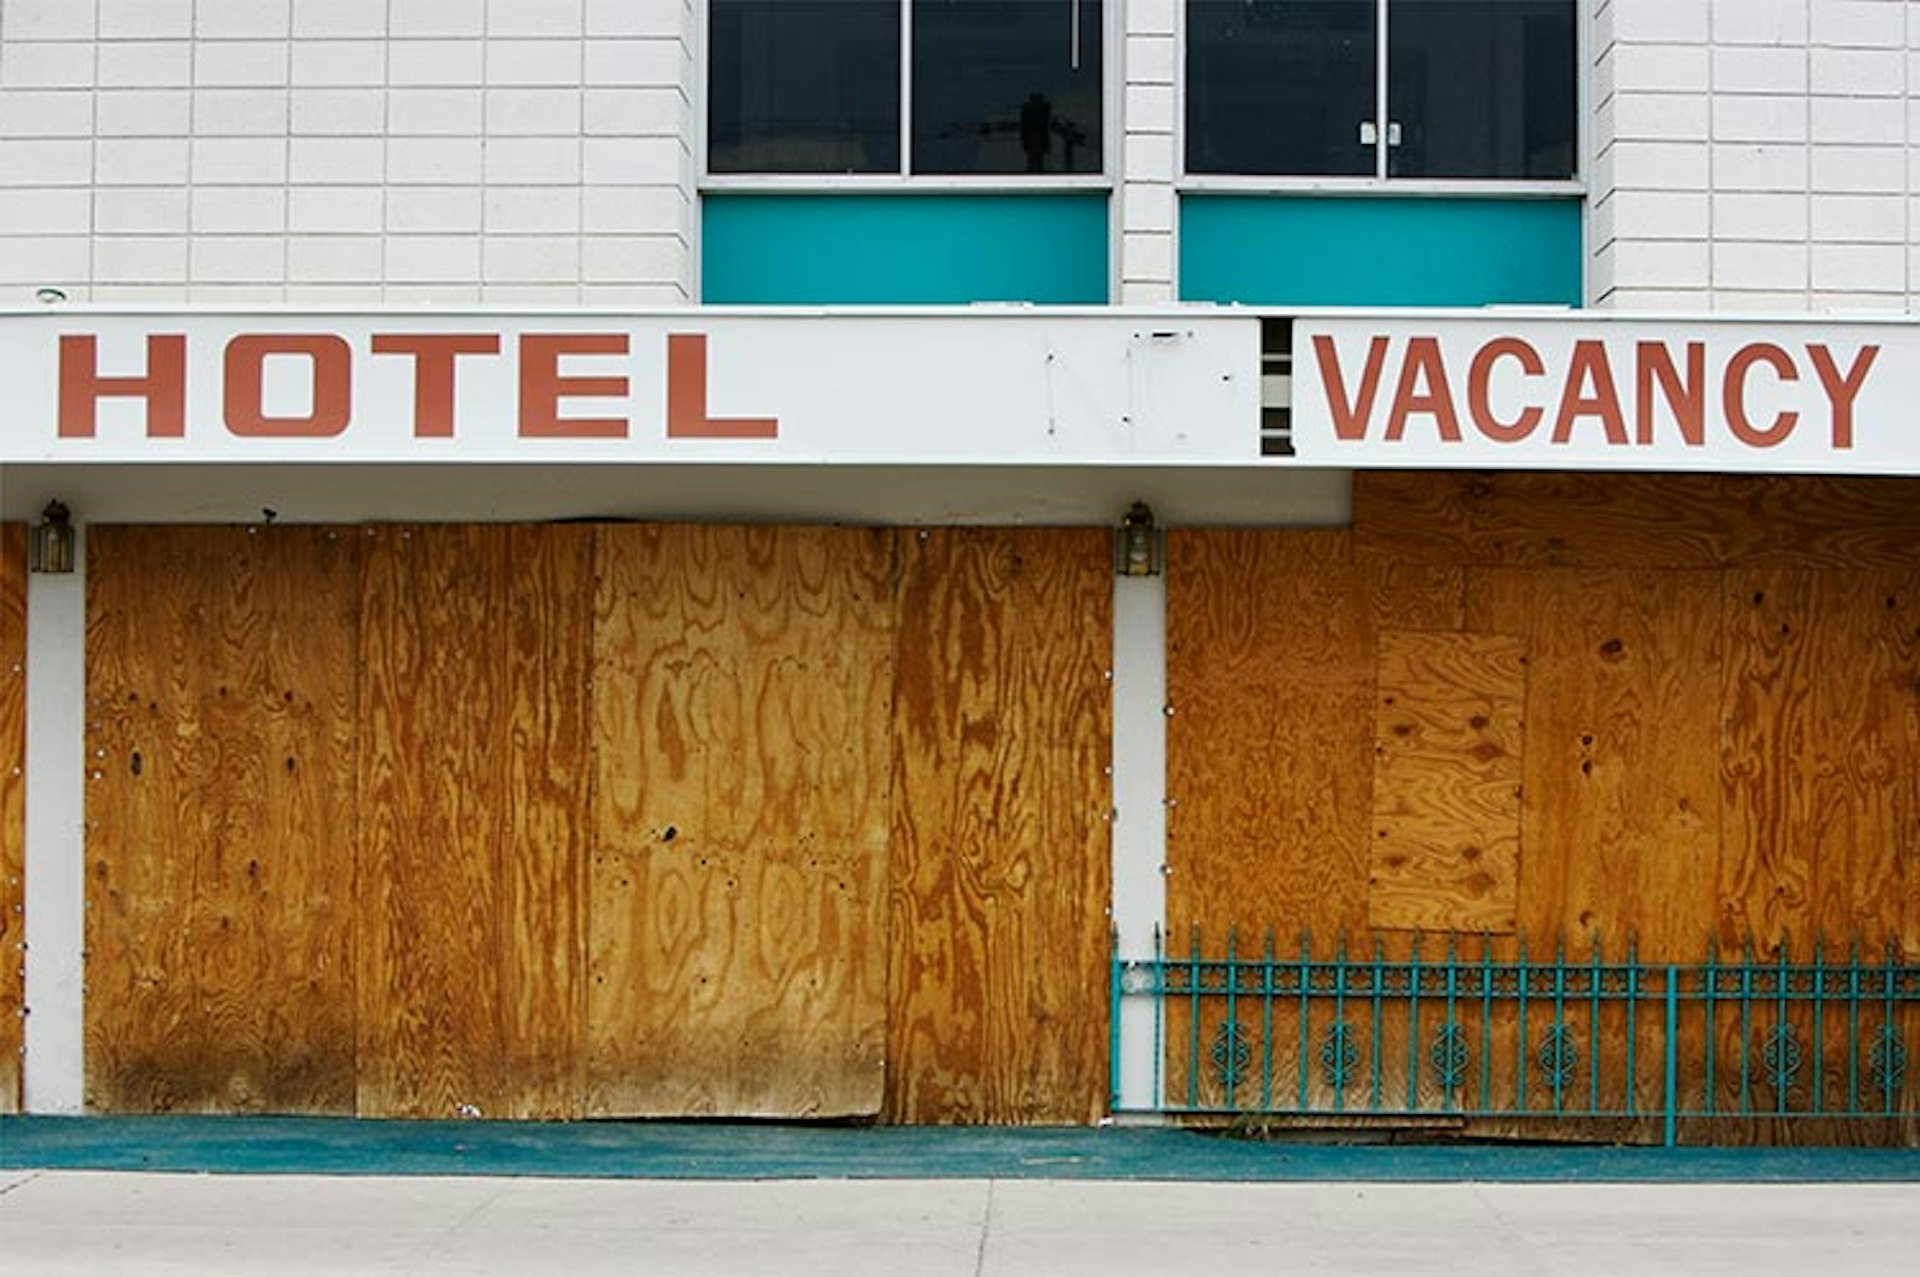 Some hotels turns out to be a bit different from their description on a website. Image by Jared McMillen / Aurora / Getty Images.